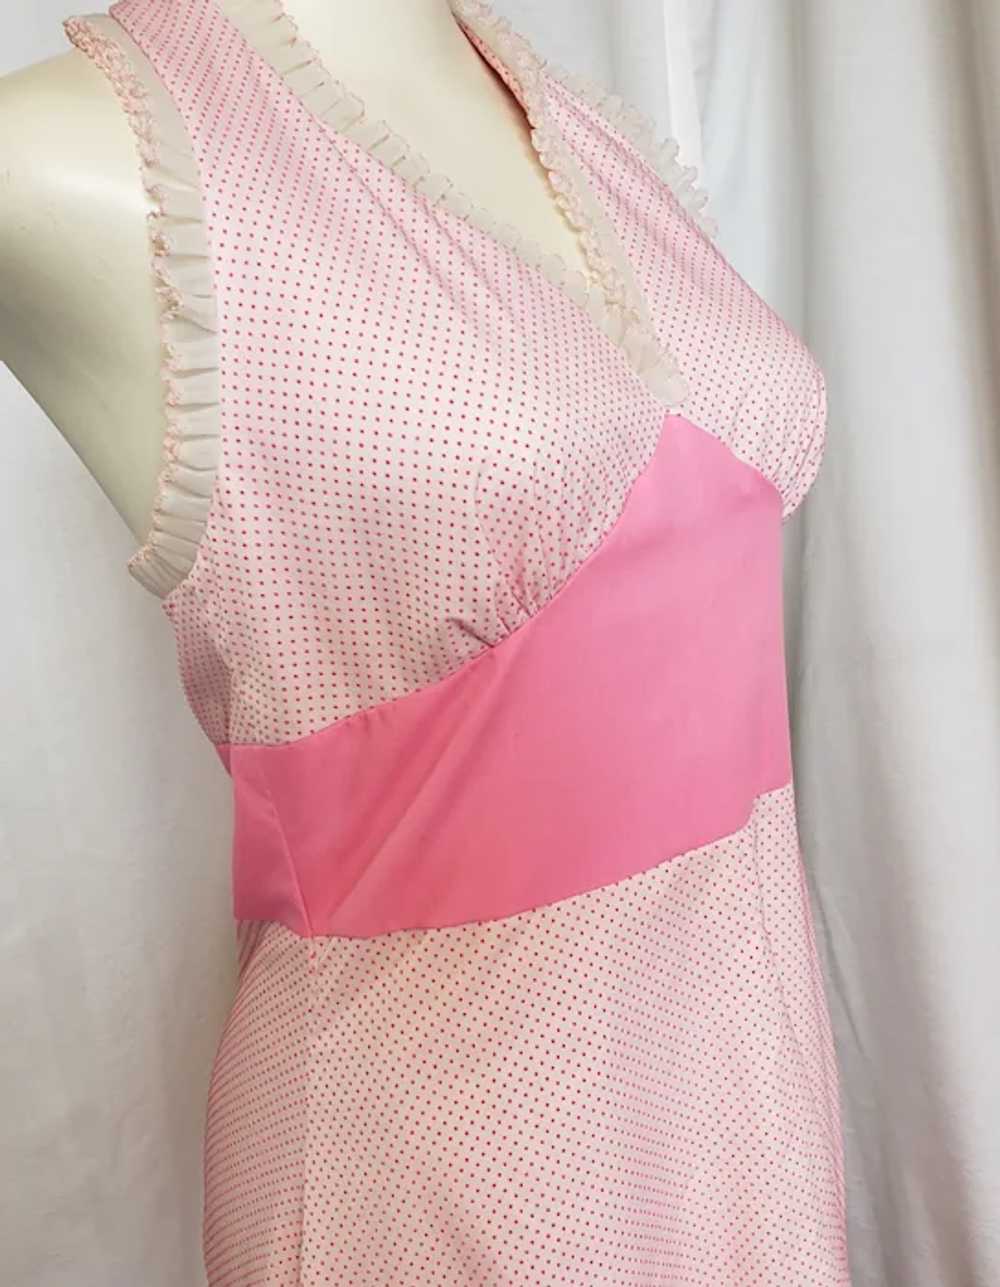 Pretty in Pink, Dotted Swiss Halter Dress - image 12